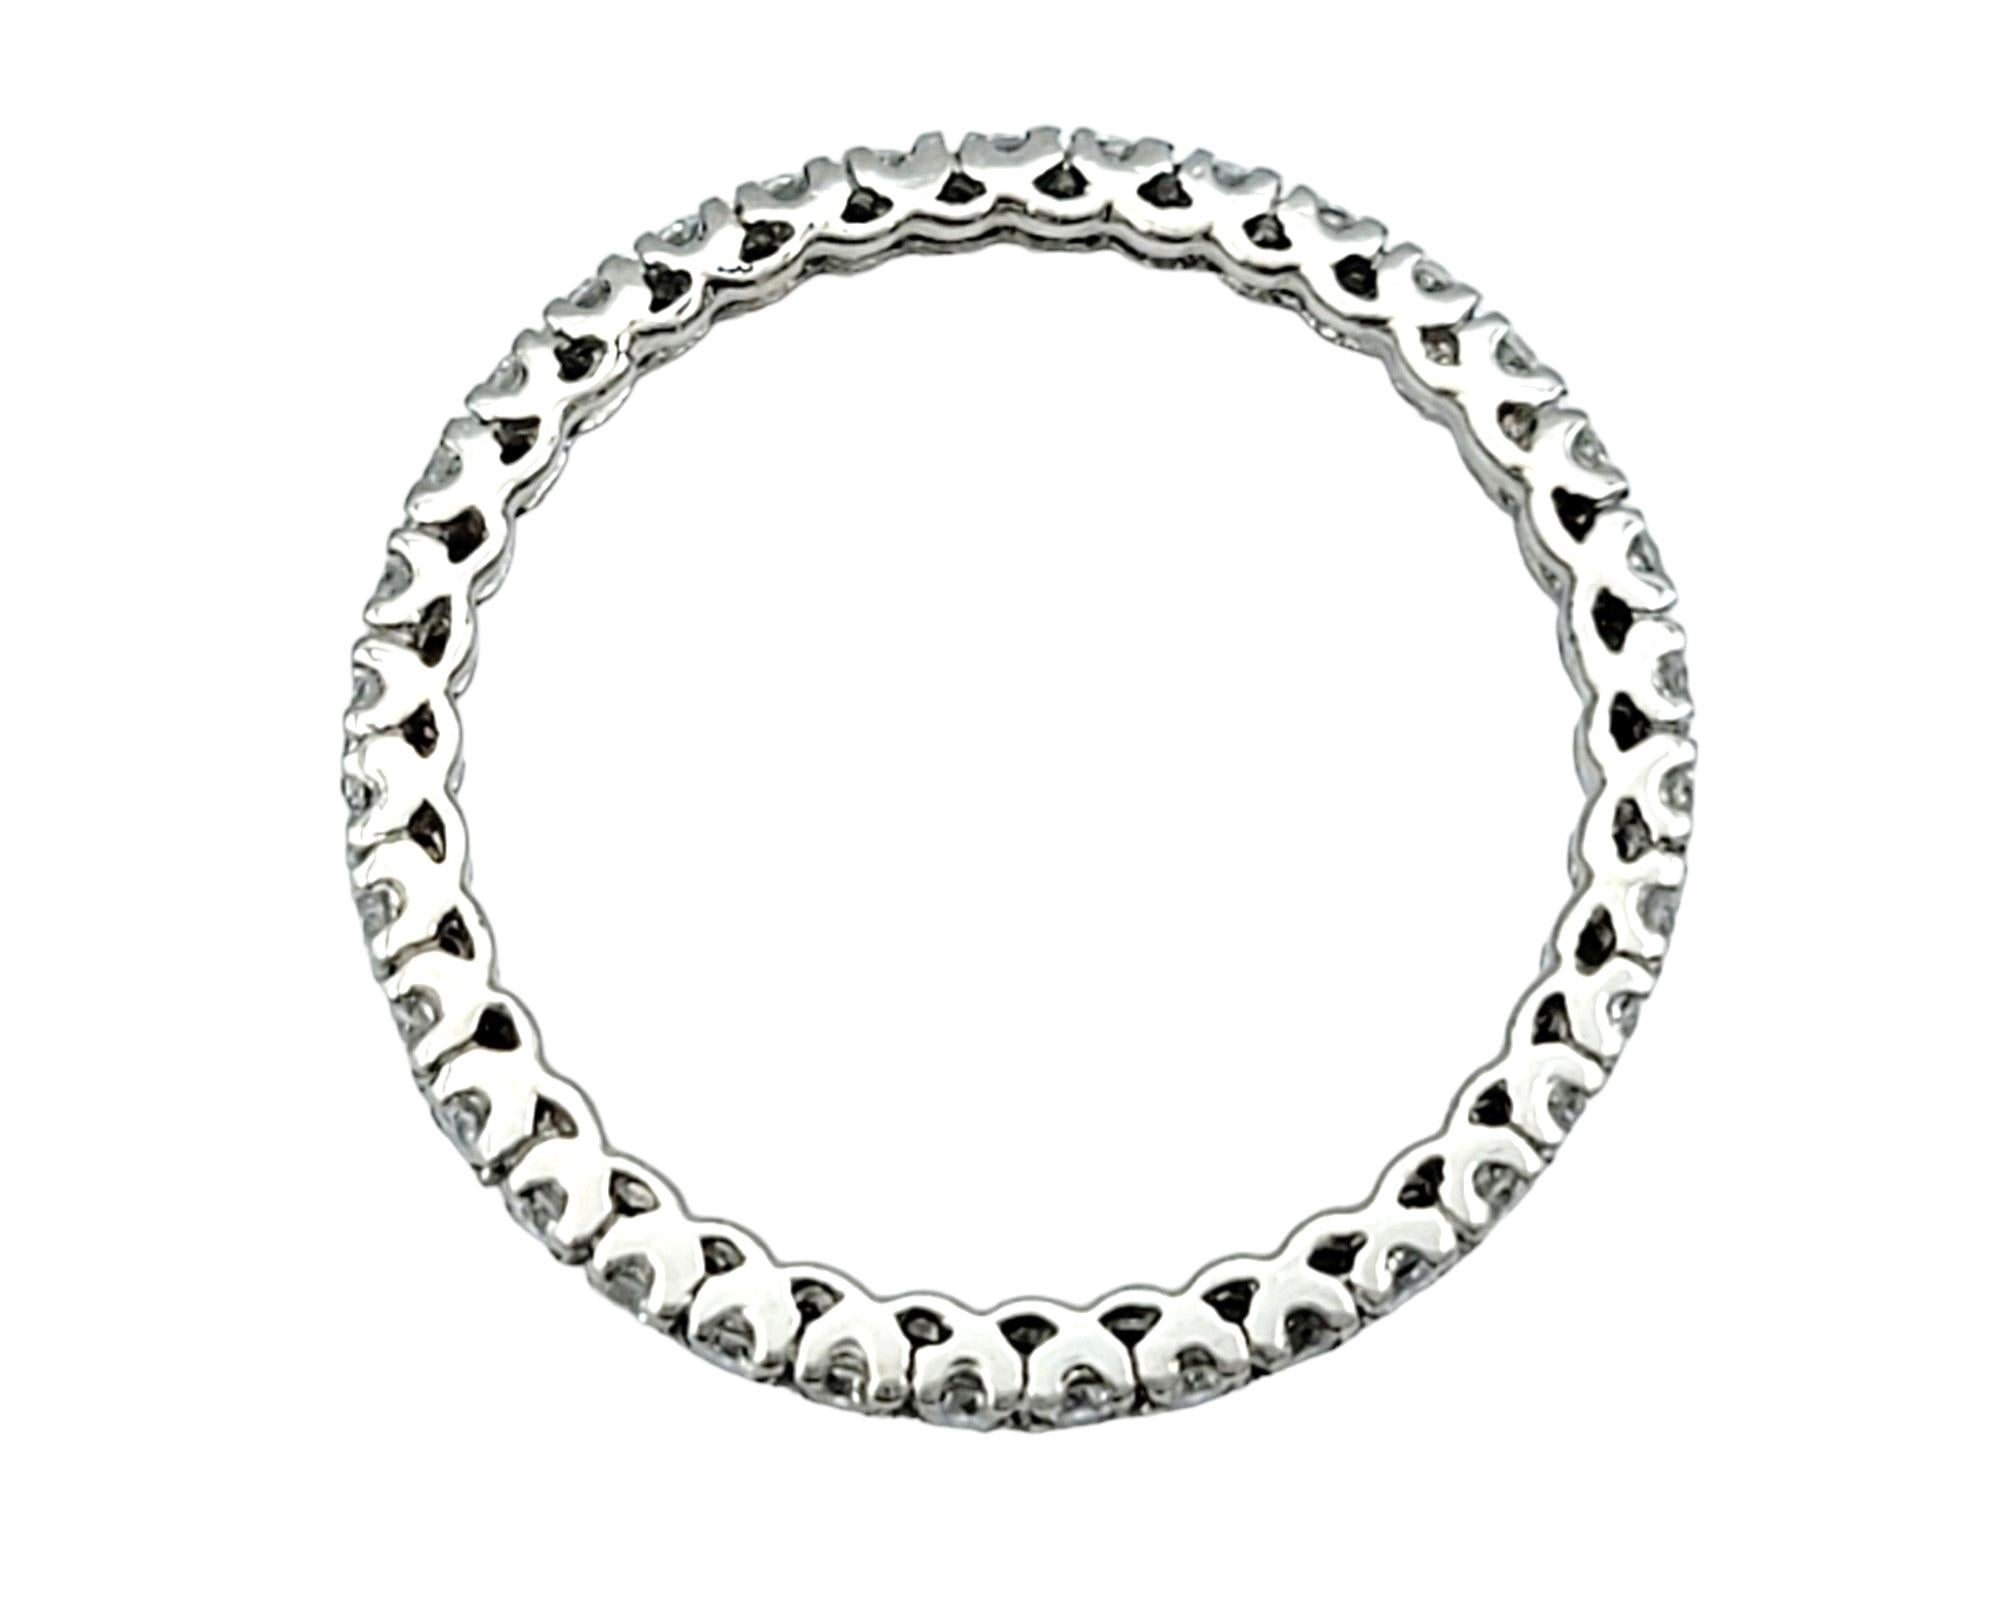 Round Brilliant Diamond Eternity Band Ring 1.5 mm Set in 18 Karat White Gold In Good Condition For Sale In Scottsdale, AZ